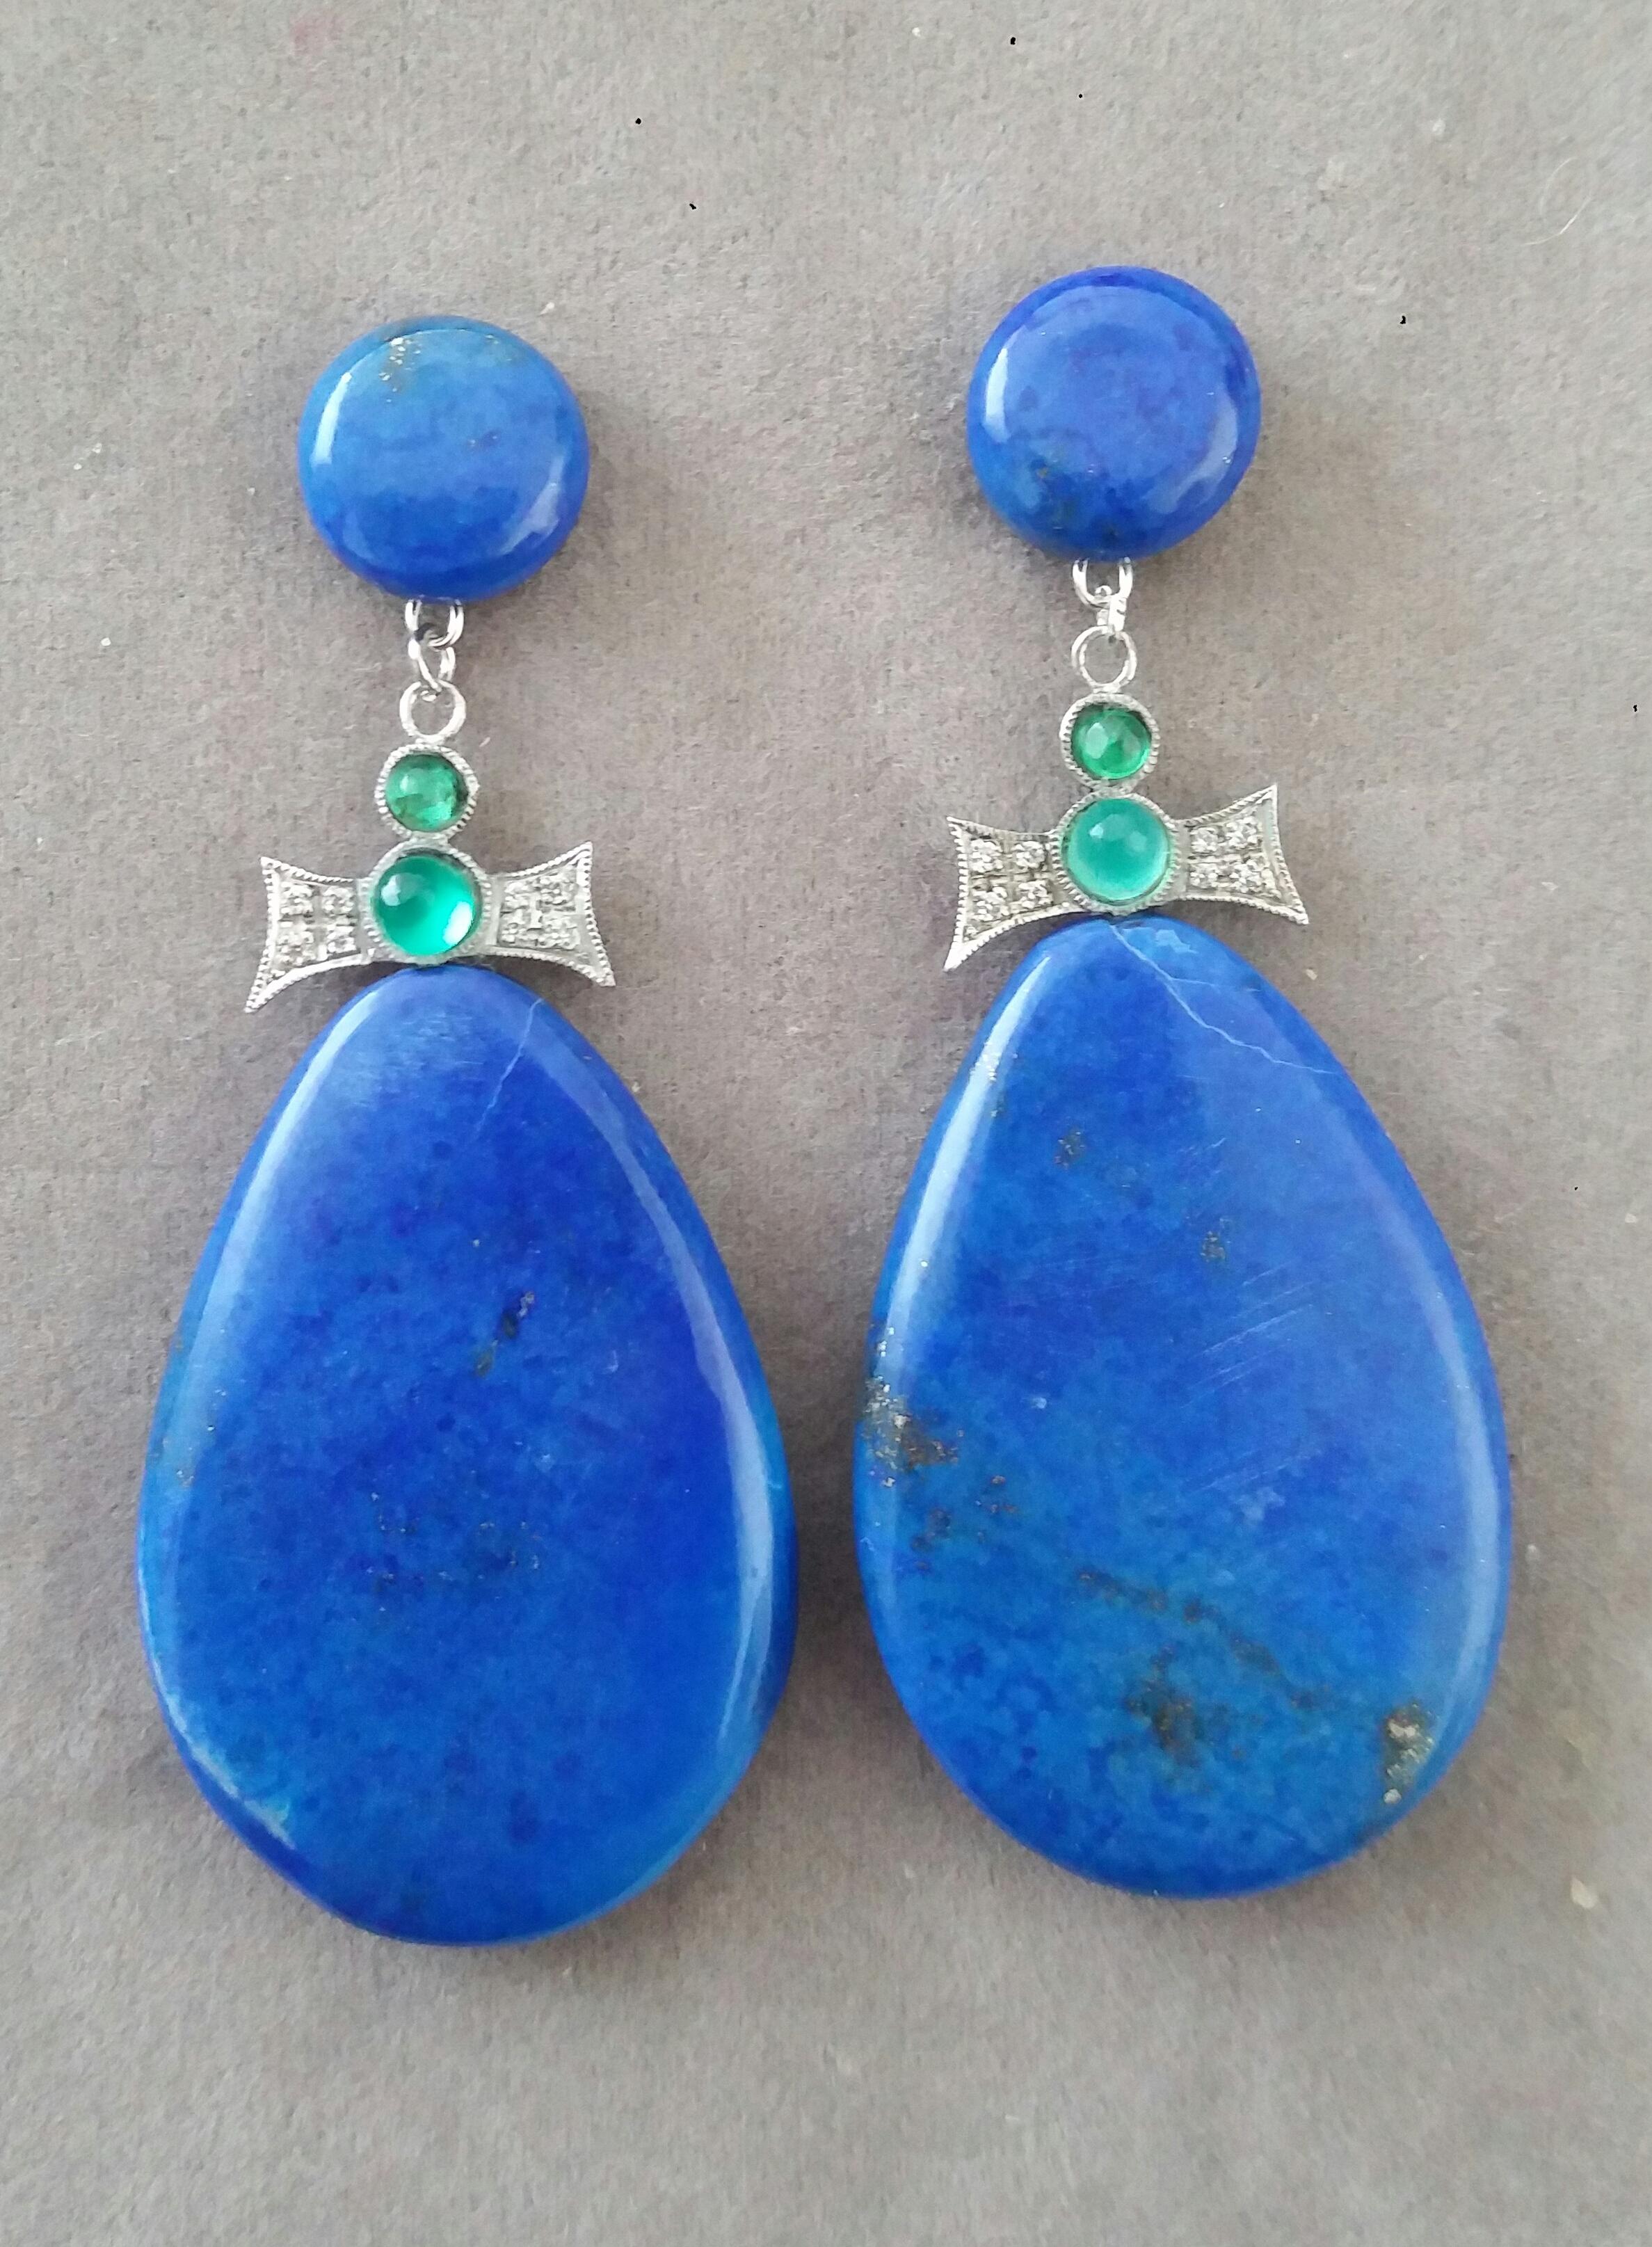 In these Art Deco Style handmade earrings 2 good quality Natural Lapis Lazuli plain drops measuring 25 x 37 mm. are suspended from 2 bow shape 14 kt white gold elements with 16 full cut round Diamonds and 4 Emerald small round cabohons.The top parts